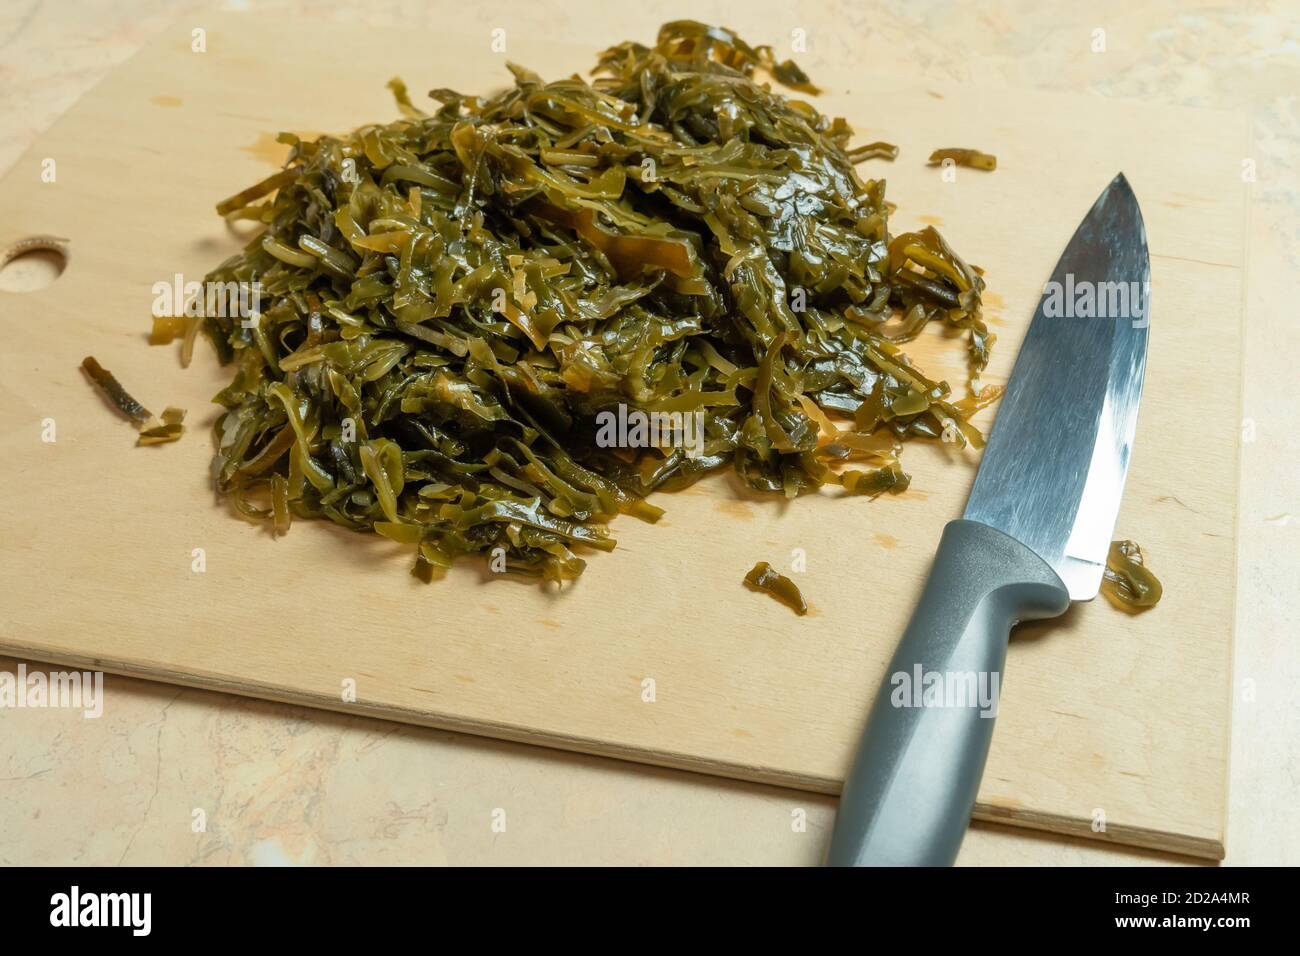 Marinated seaweed laminaria, knife, wooden Board on the table close-up Stock Photo